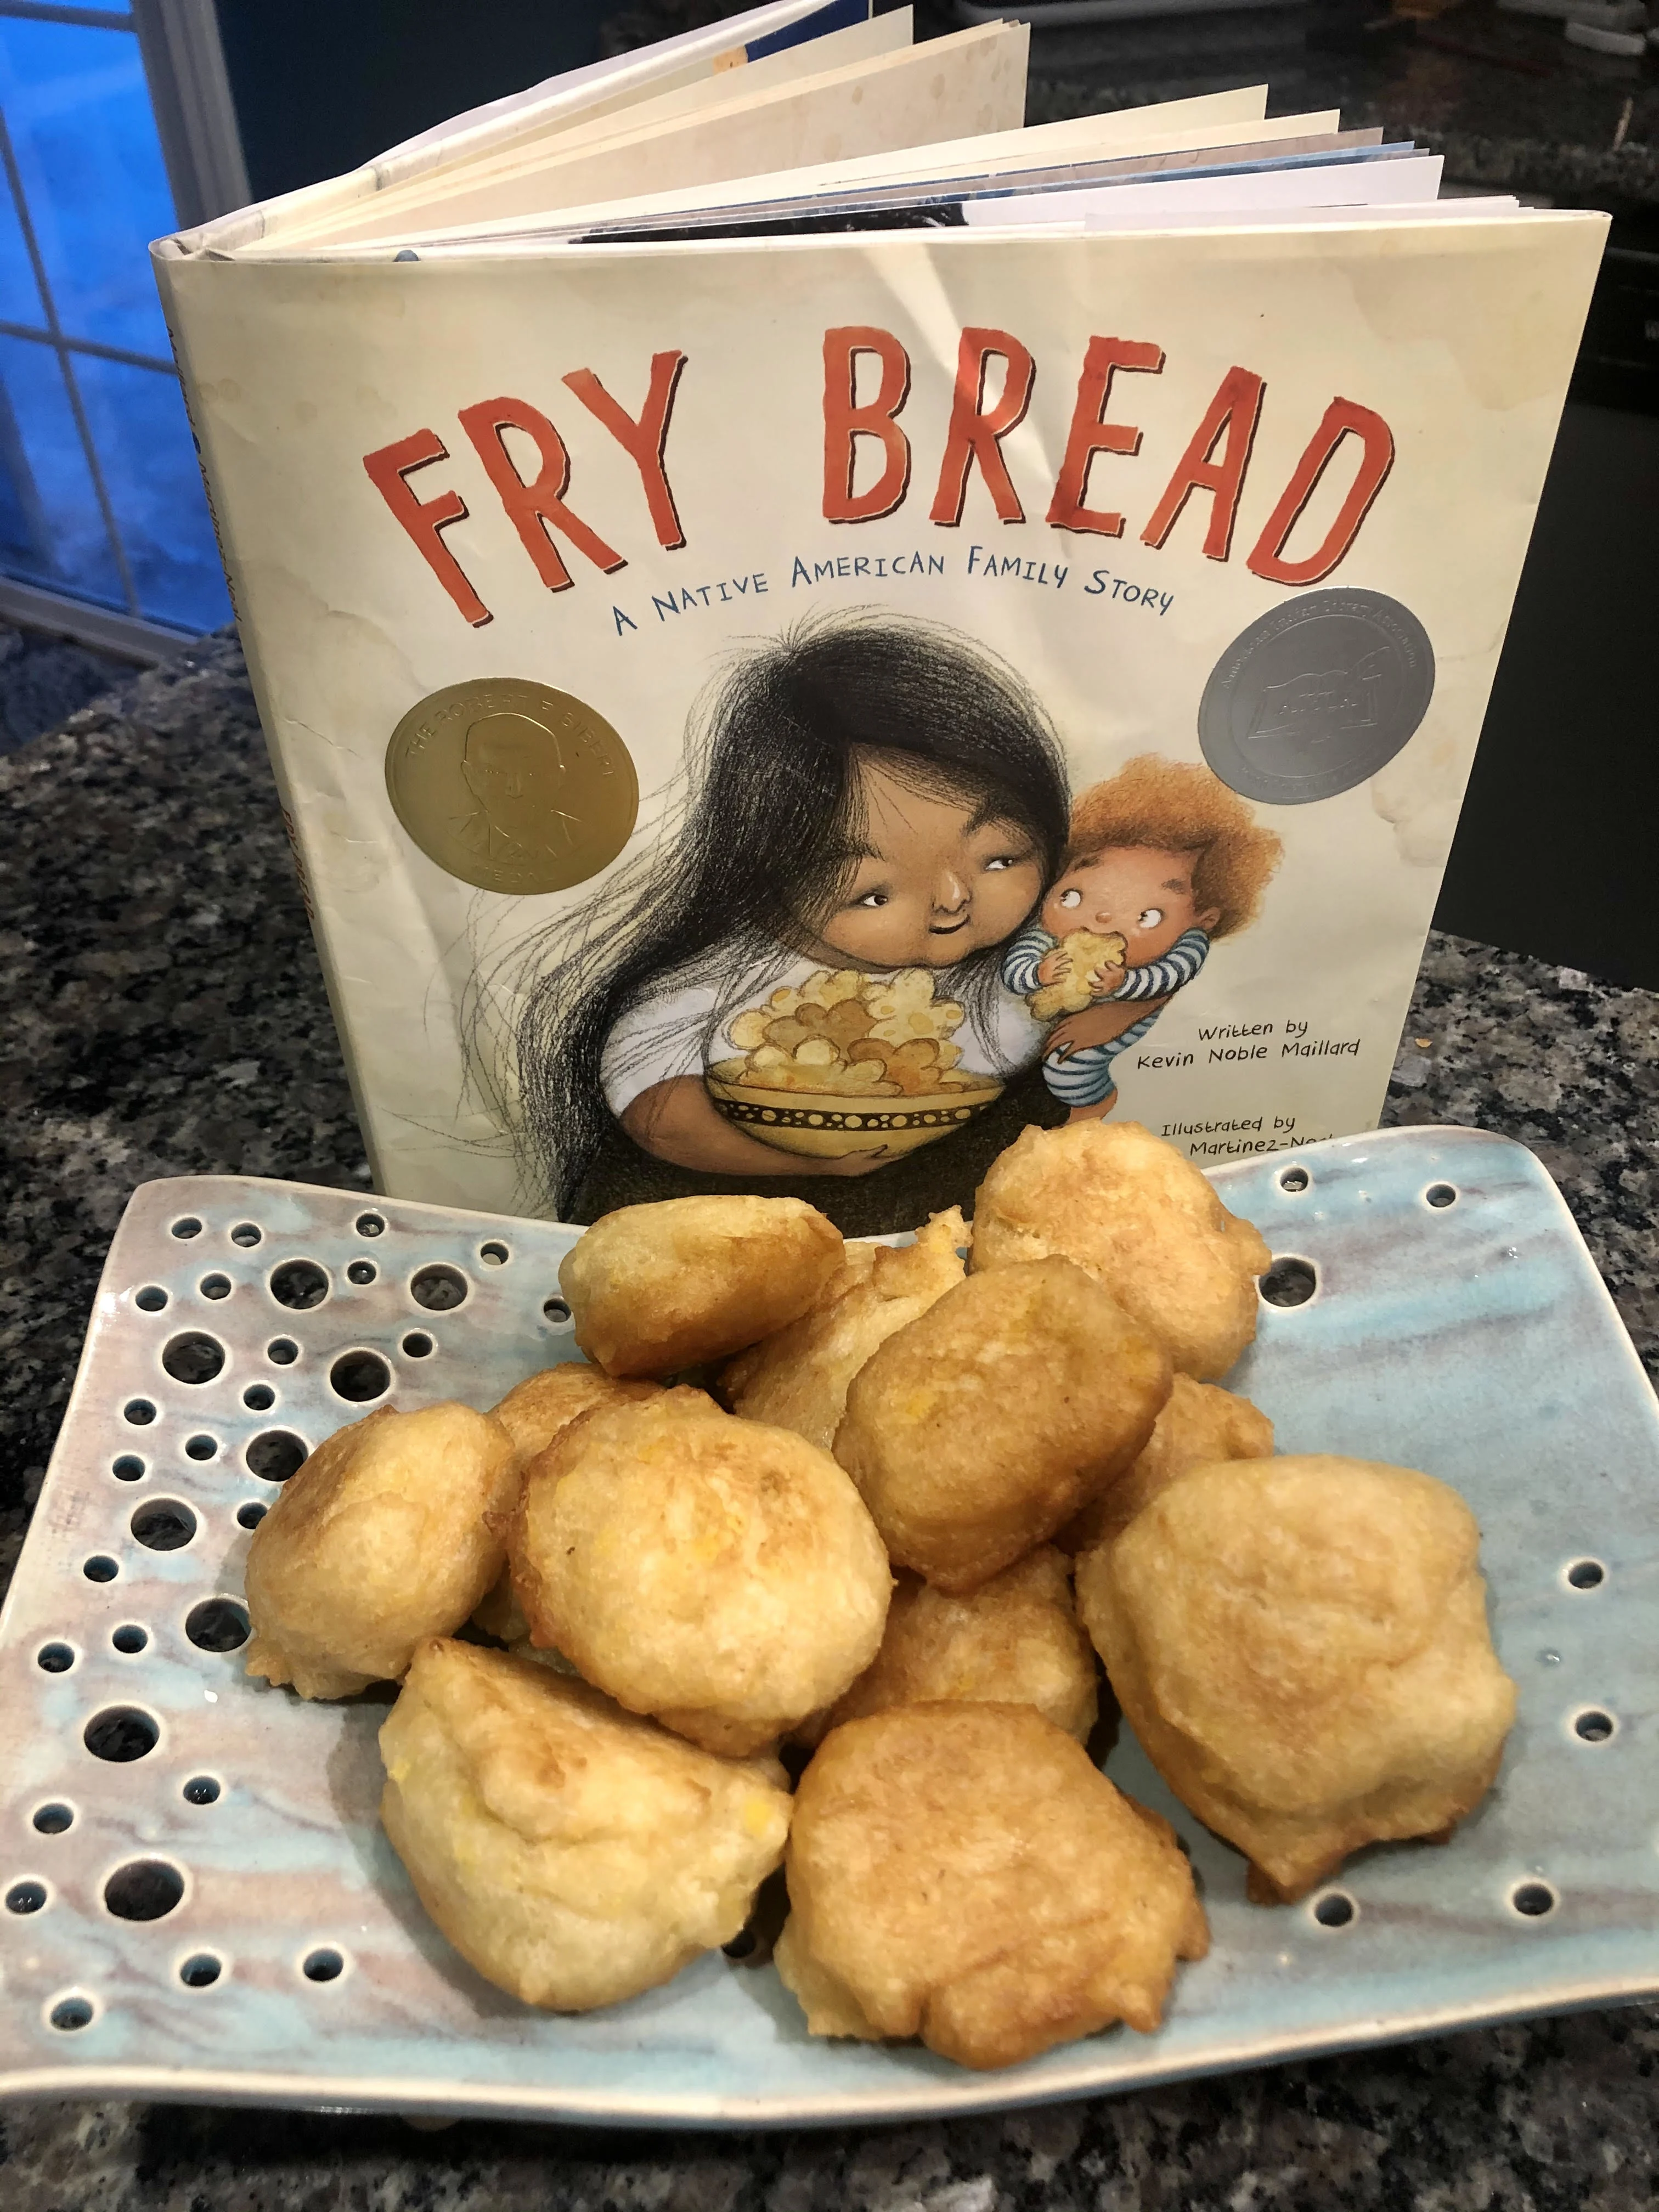 cooked fry bread on tray in front of Fry bread children's book